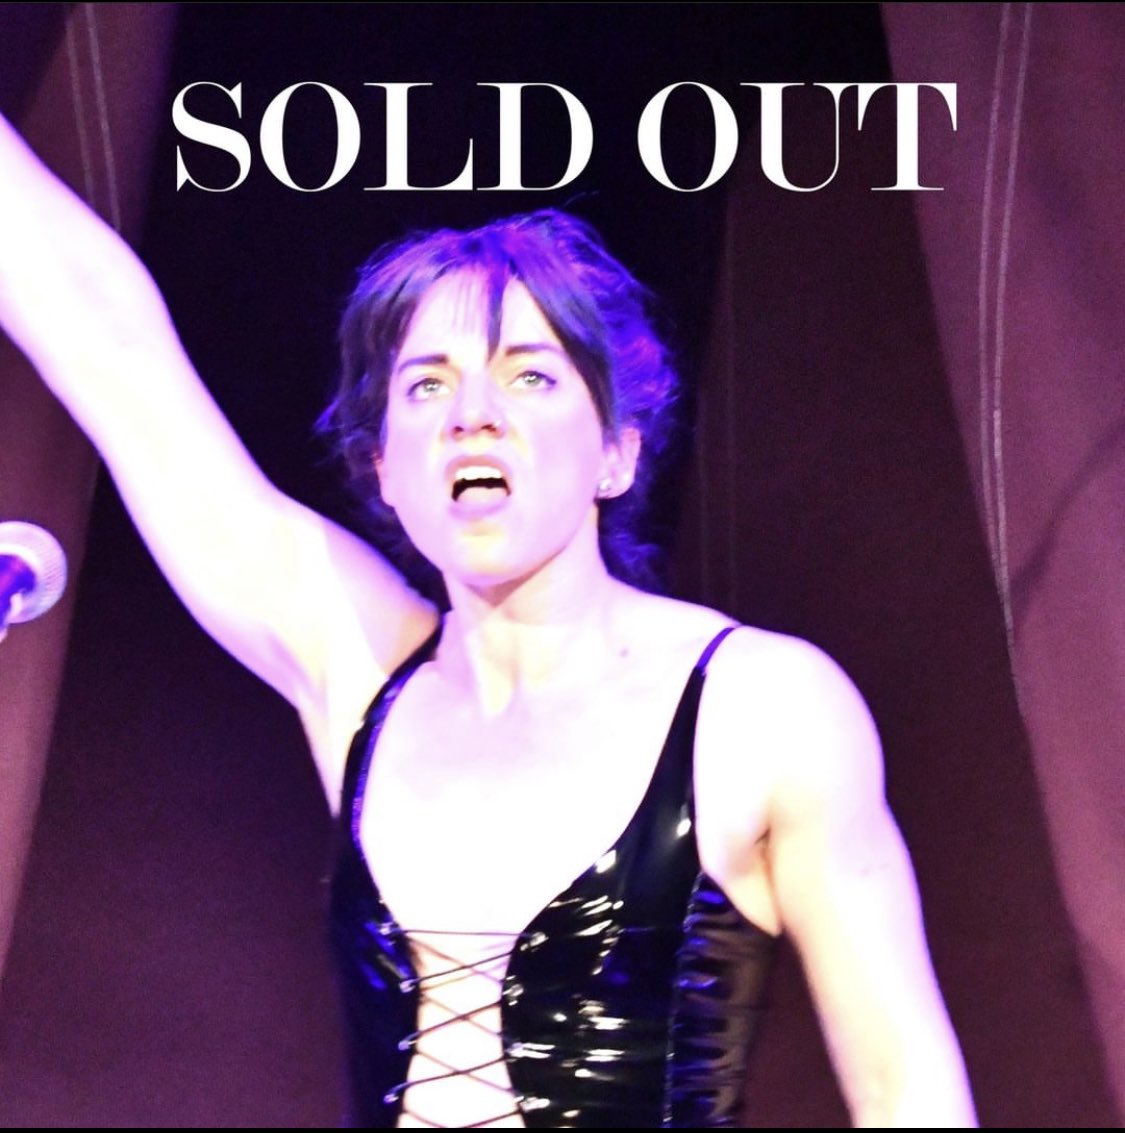 The Burlesque Imposter has now officially SOLD OUT for @brightonfringe! Thanks to everyone who has come to support the show. See you for one more night of mayhem!